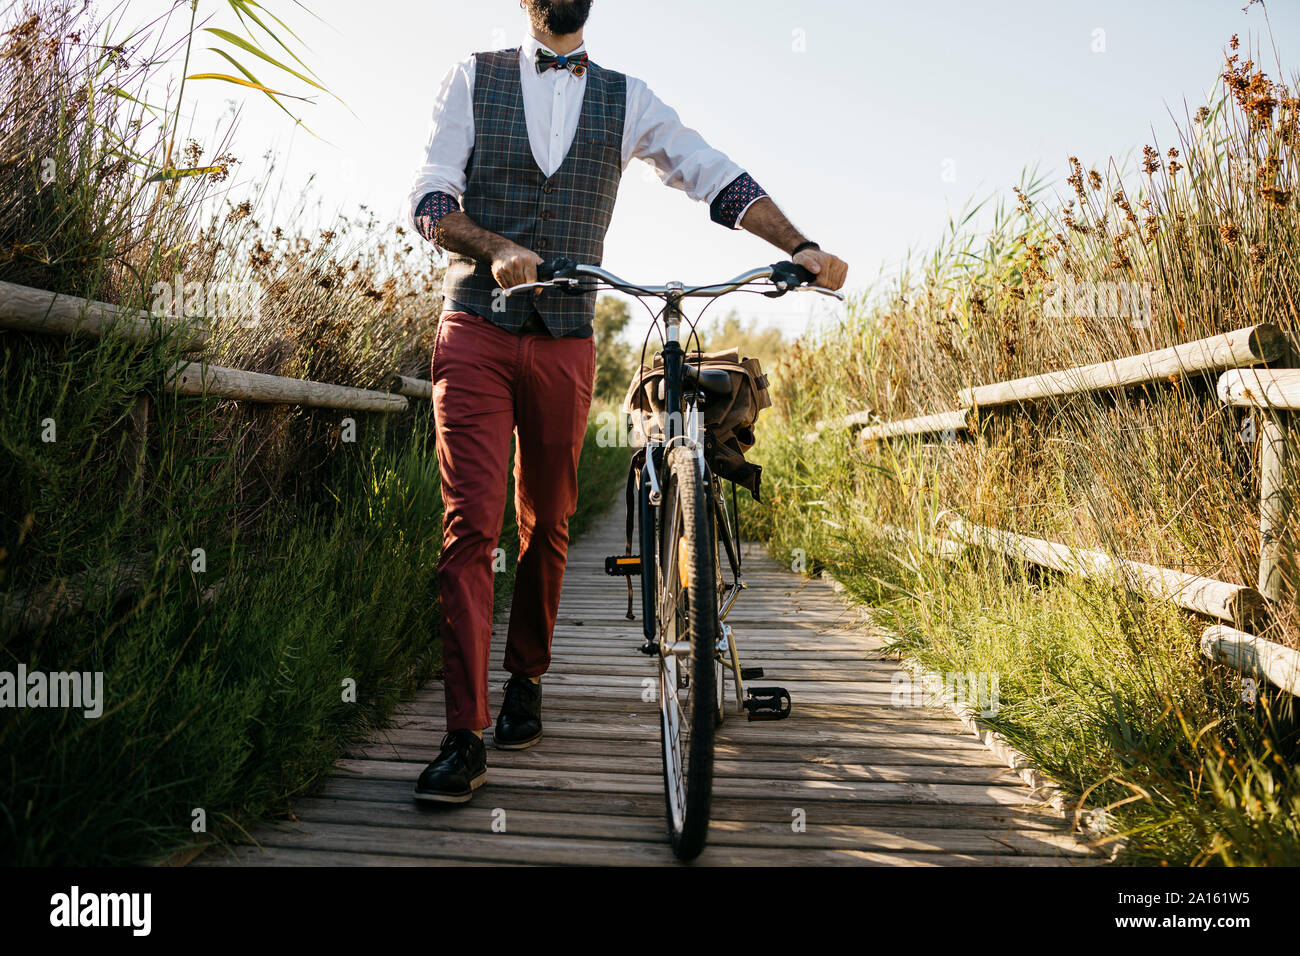 Well dressed man walking with his bike on a wooden walkway in the countryside after work Stock Photo